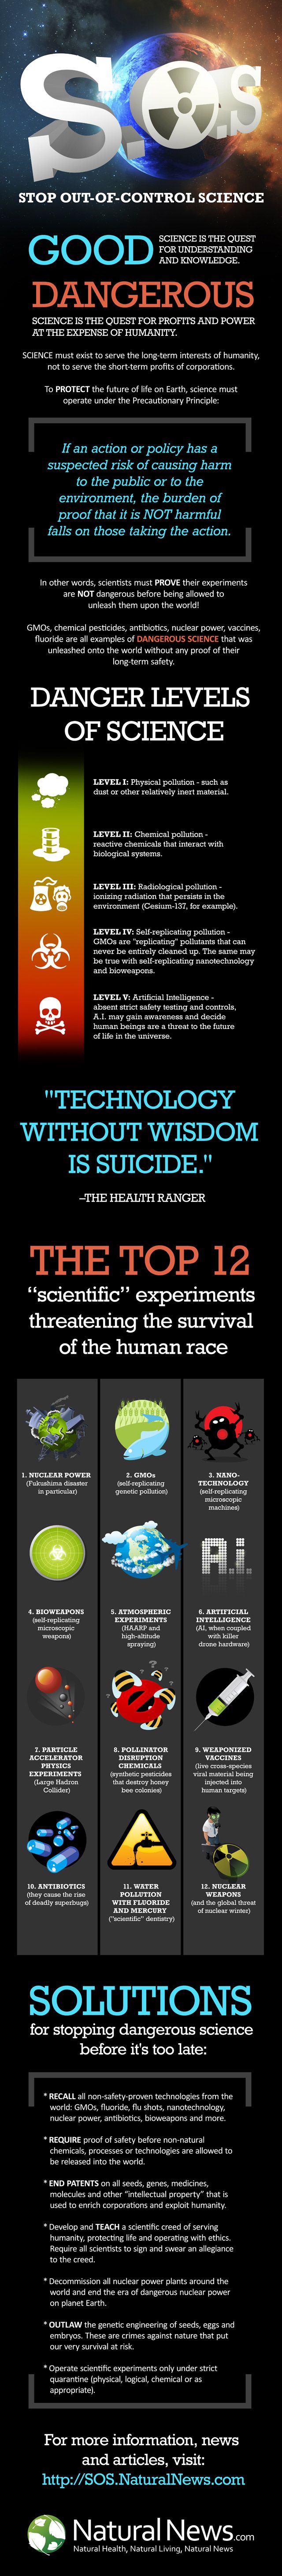 Infographic SOS Stop Out Of Control Science